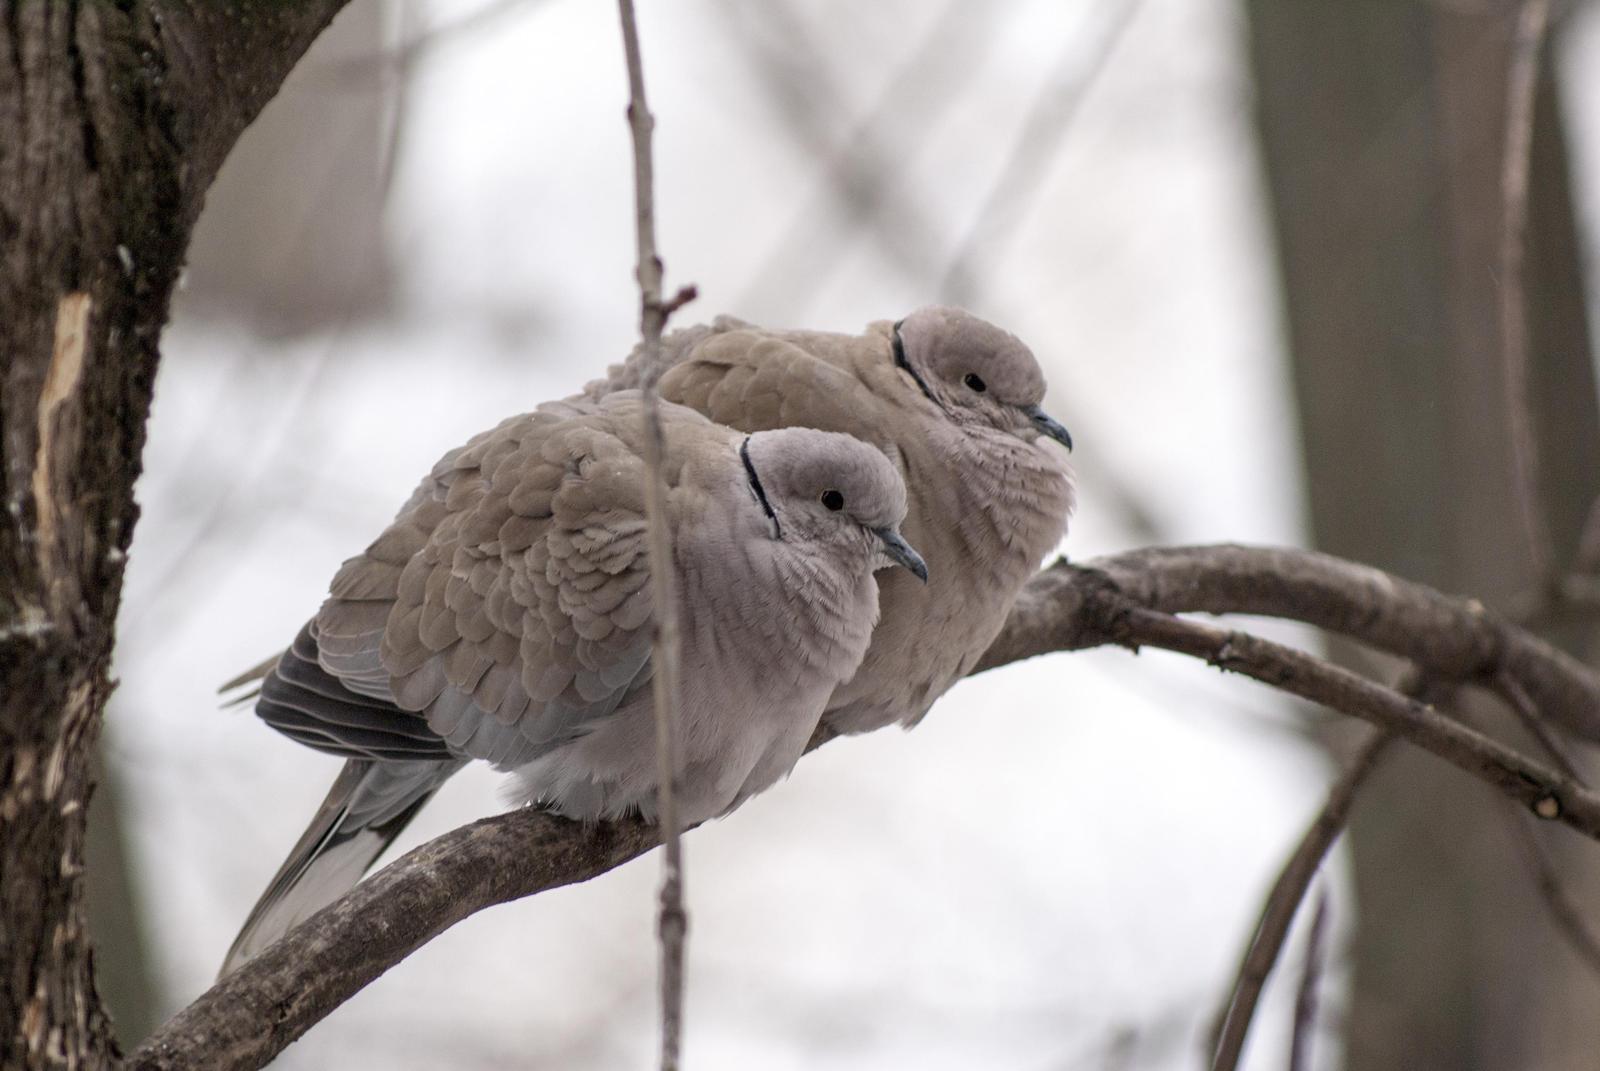 Eurasian Collared-Dove Photo by African Googre